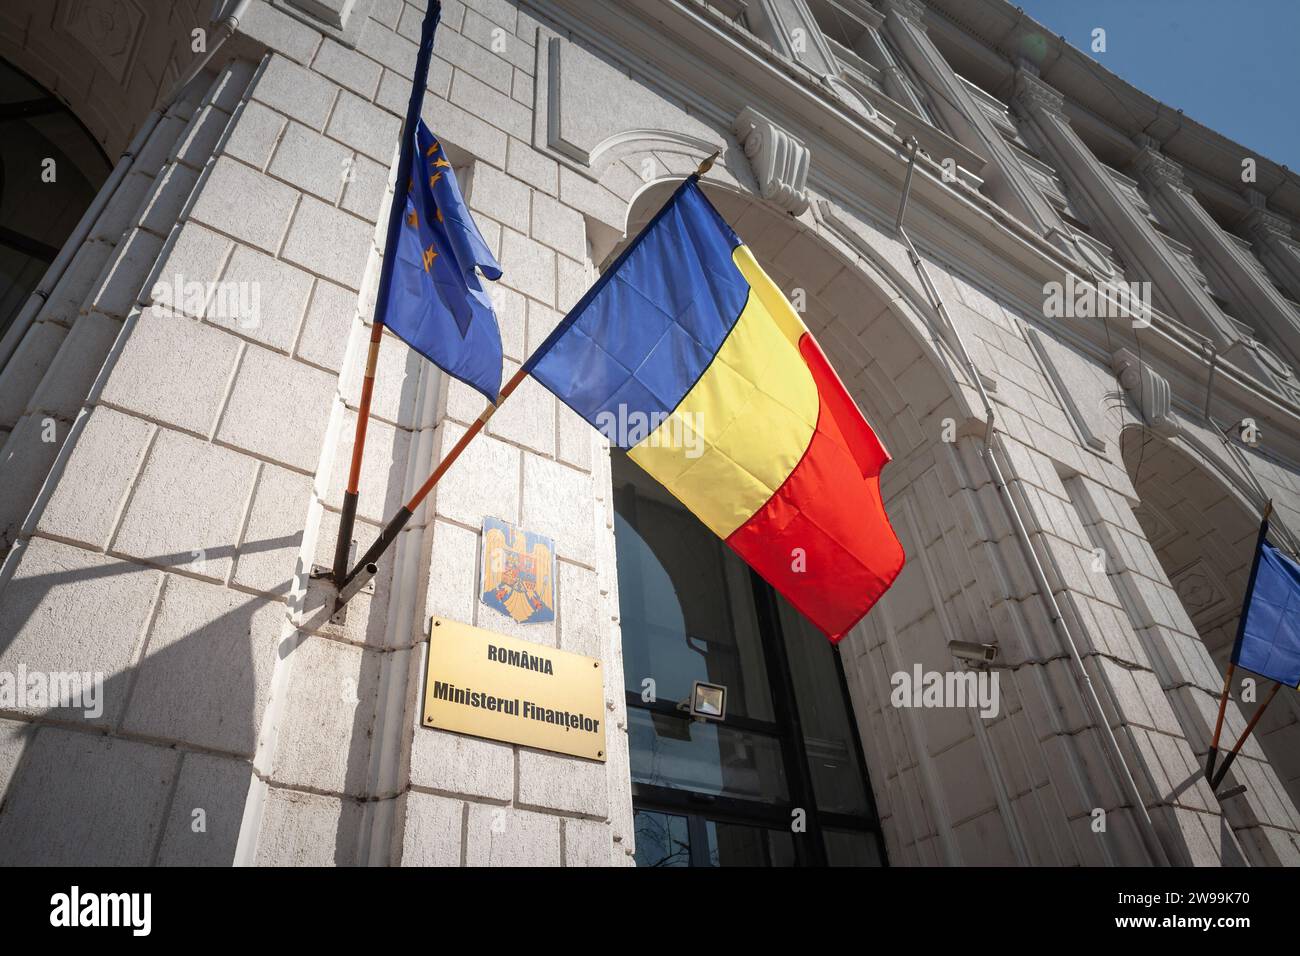 Picture of the entrance to the romanian ministry of finances in Bucharest, Romania. The Ministry of Finance of Romania is one of the fifteen ministrie Stock Photo